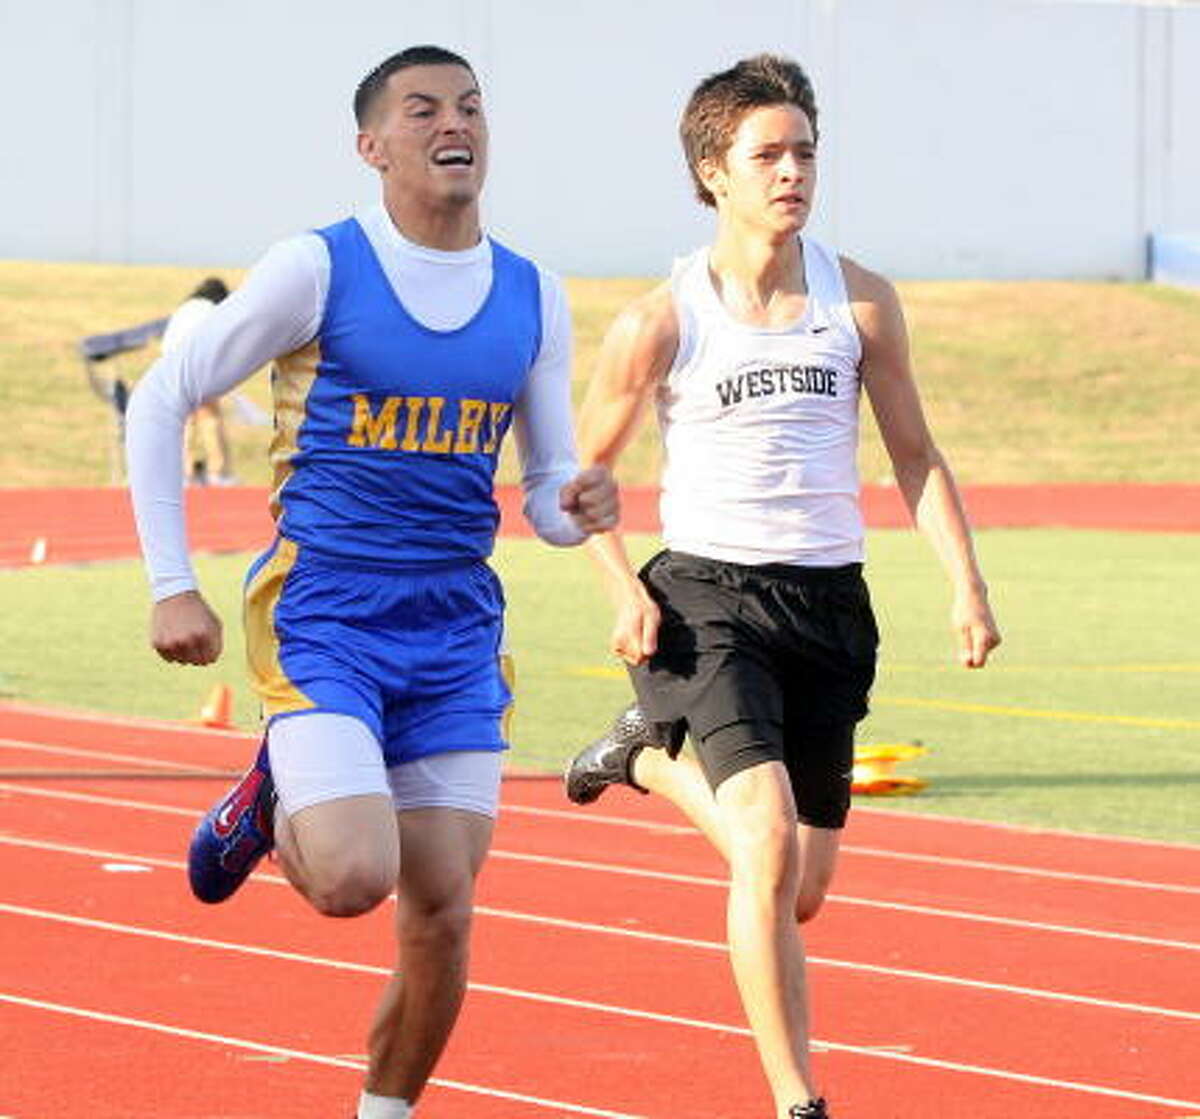 It's a fight between Milby's Eric White, left, and Westside's Christian Aleman in the 400 meters.